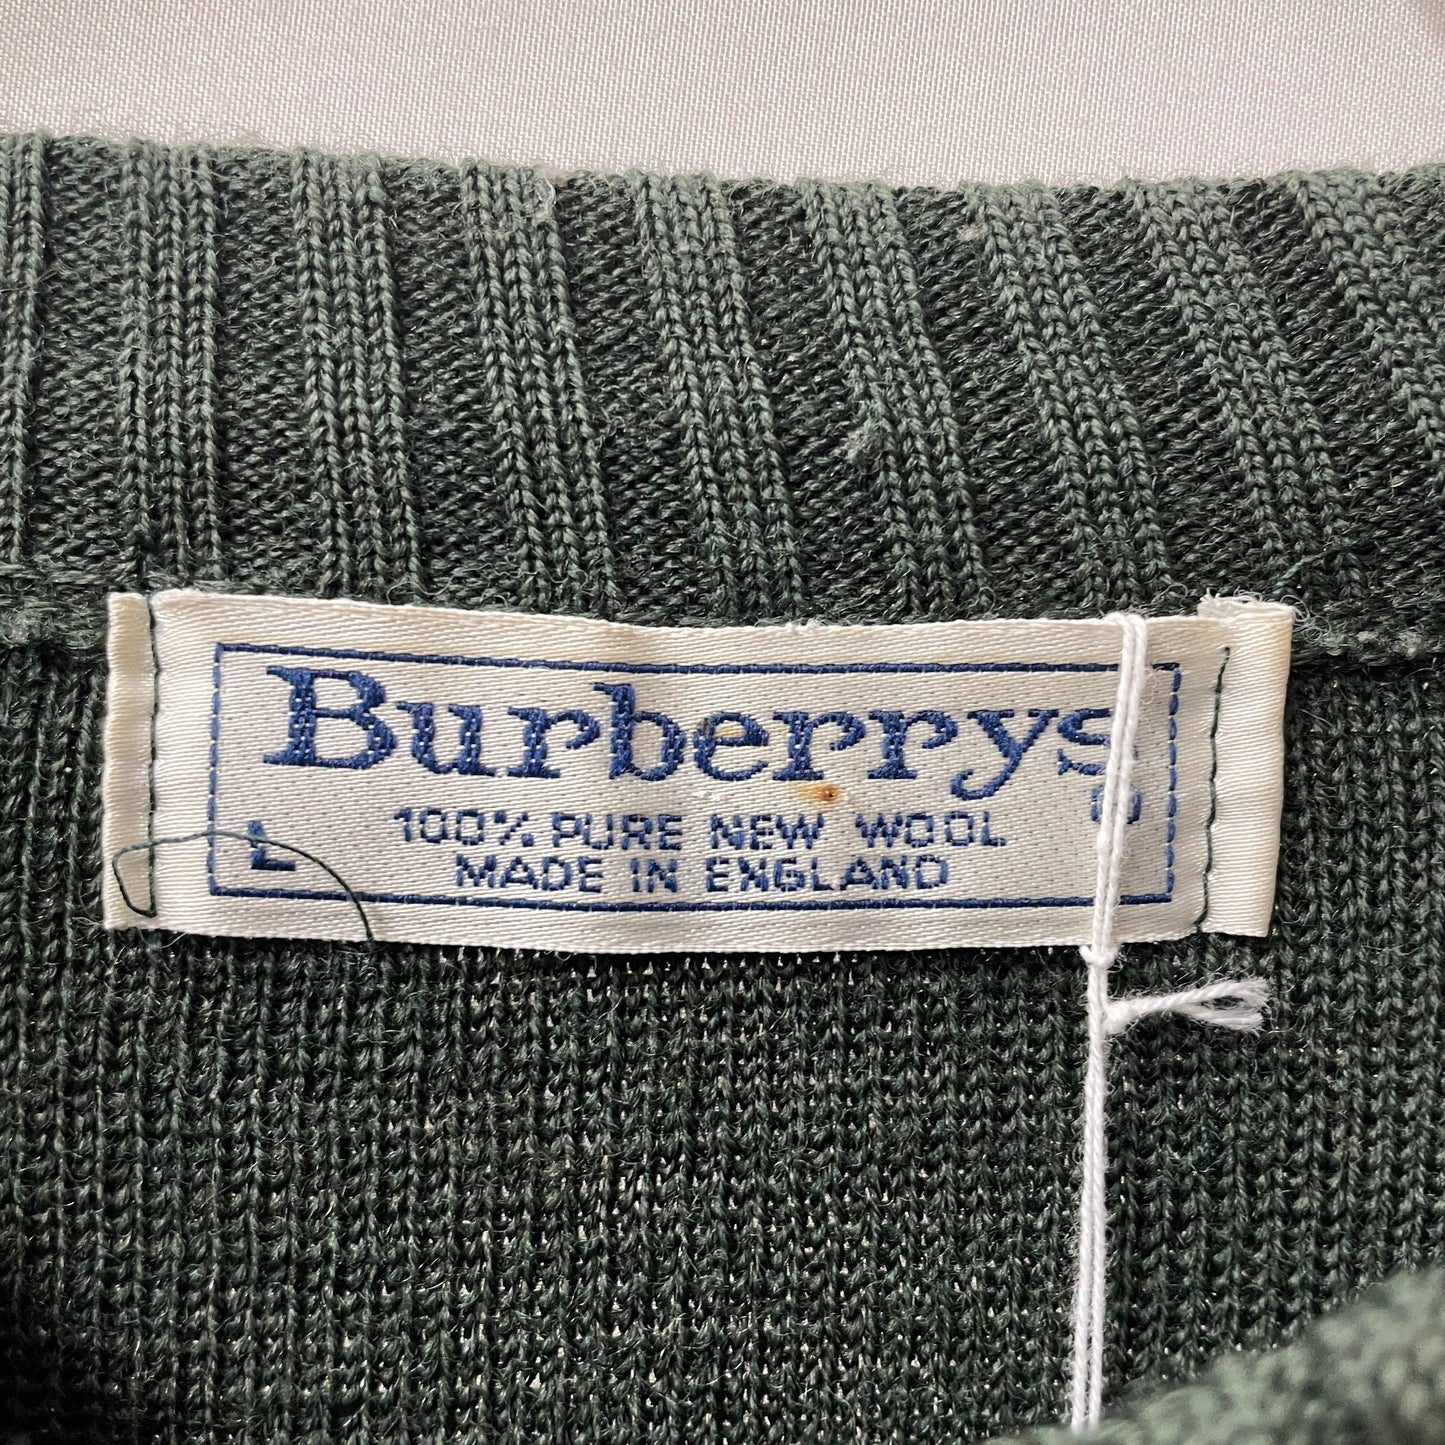 burberrys knit burberry leather elbow patch burberry